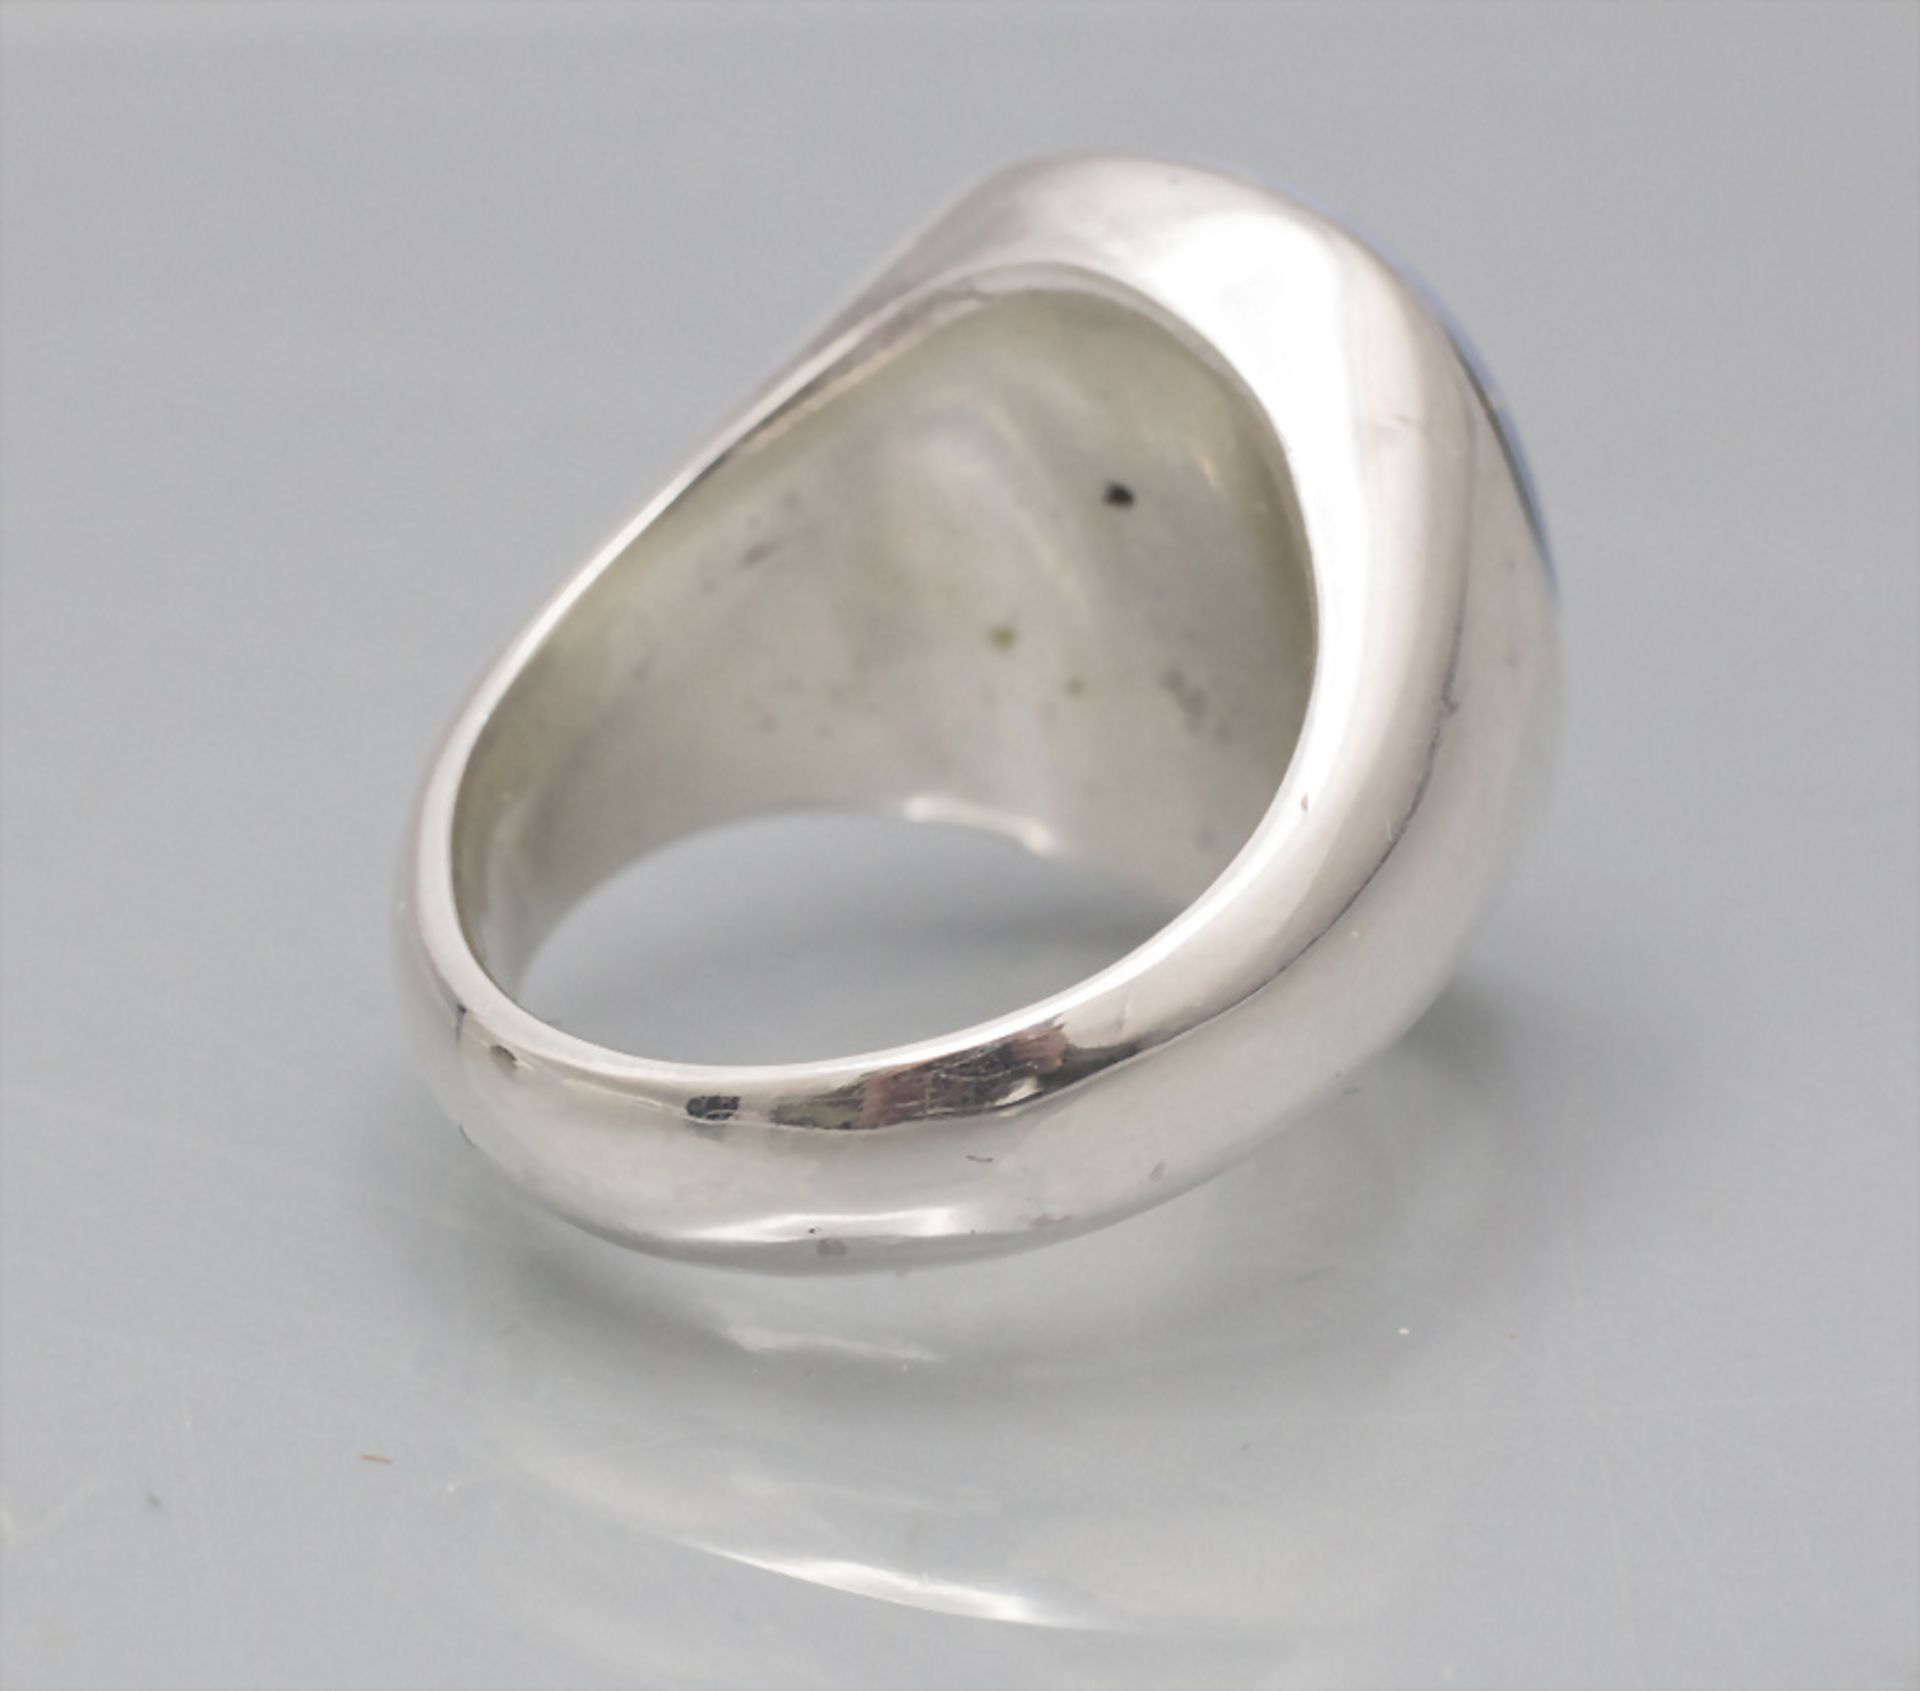 Siegelring / A silver seal ring, 20. Jh. - Image 4 of 4